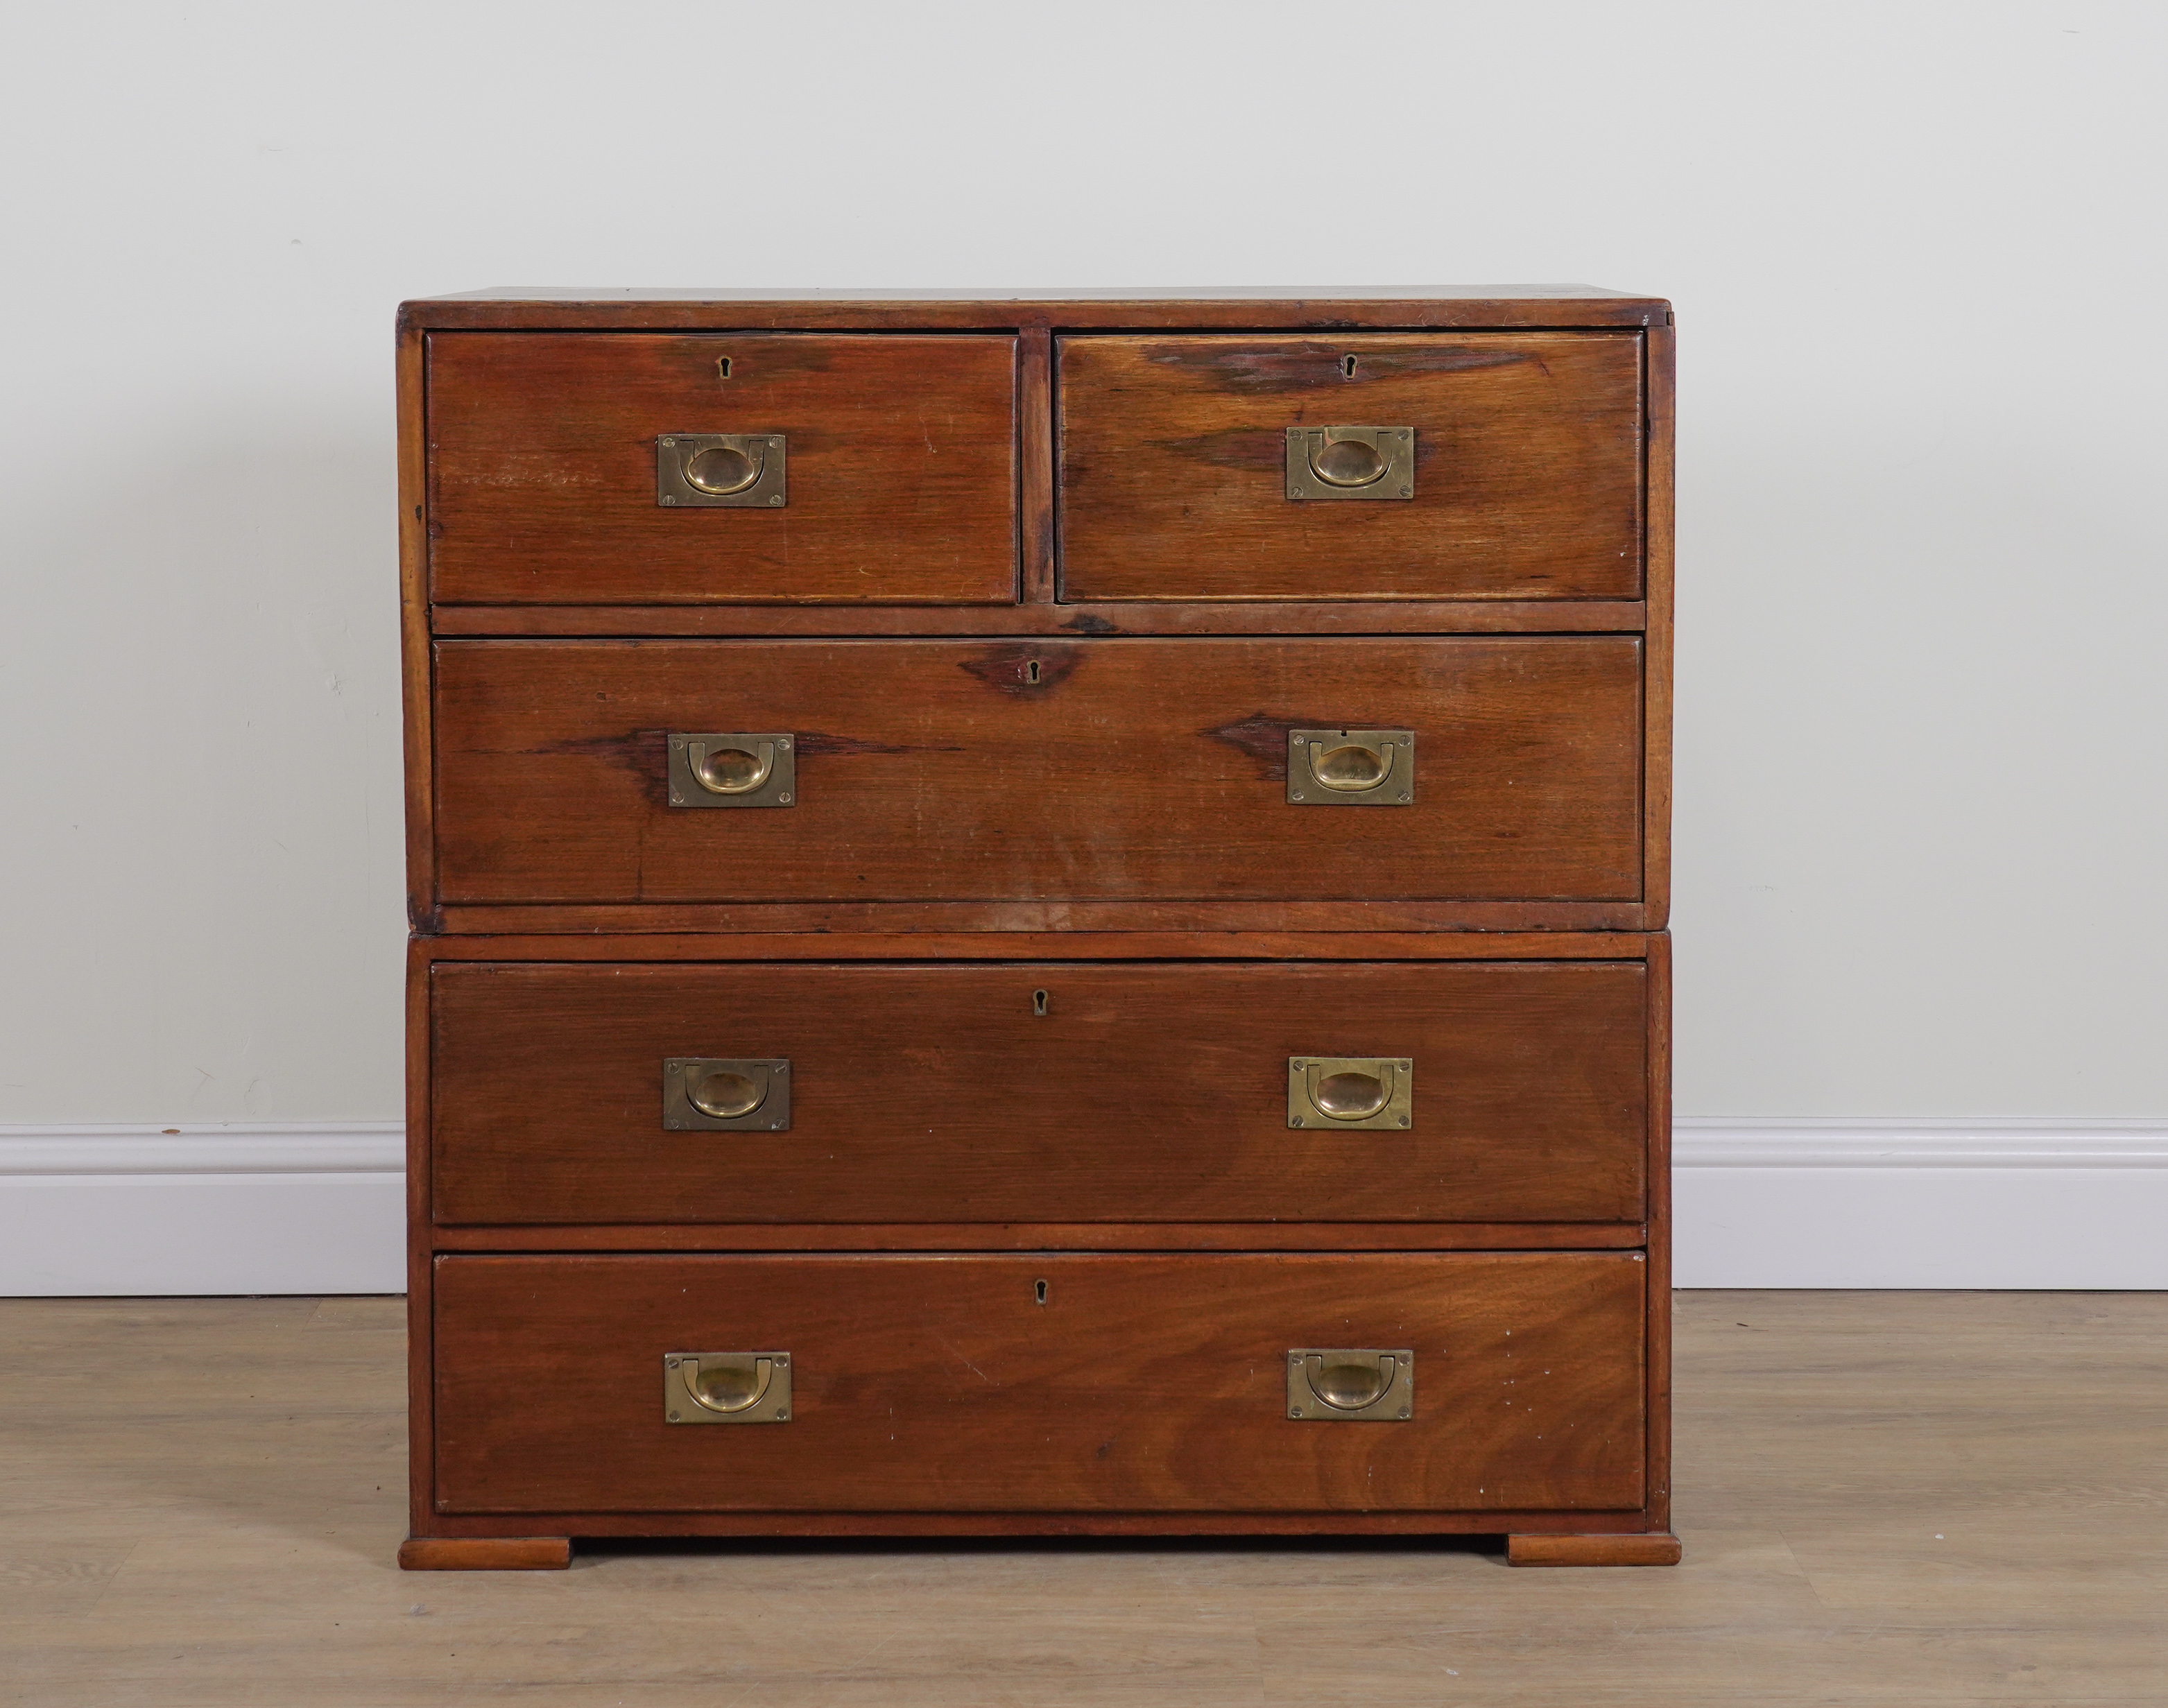 AN EARLY 20TH CENTURY TEAK FIVE DRAWER TWO PART CAMPAIGN STYLE CHEST